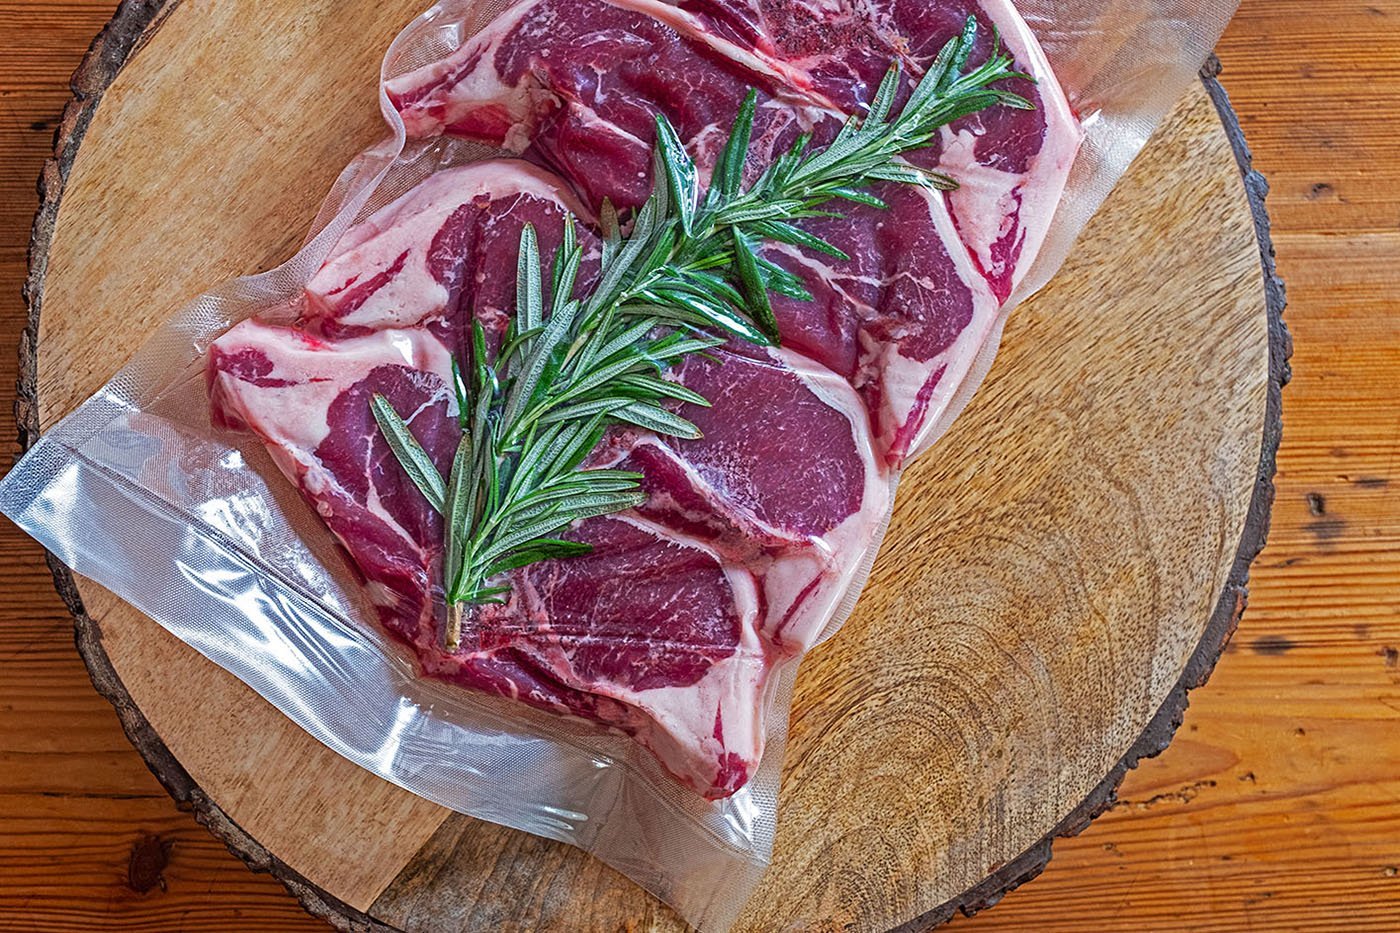 A Practical Guide to Sous-Vide Cooking